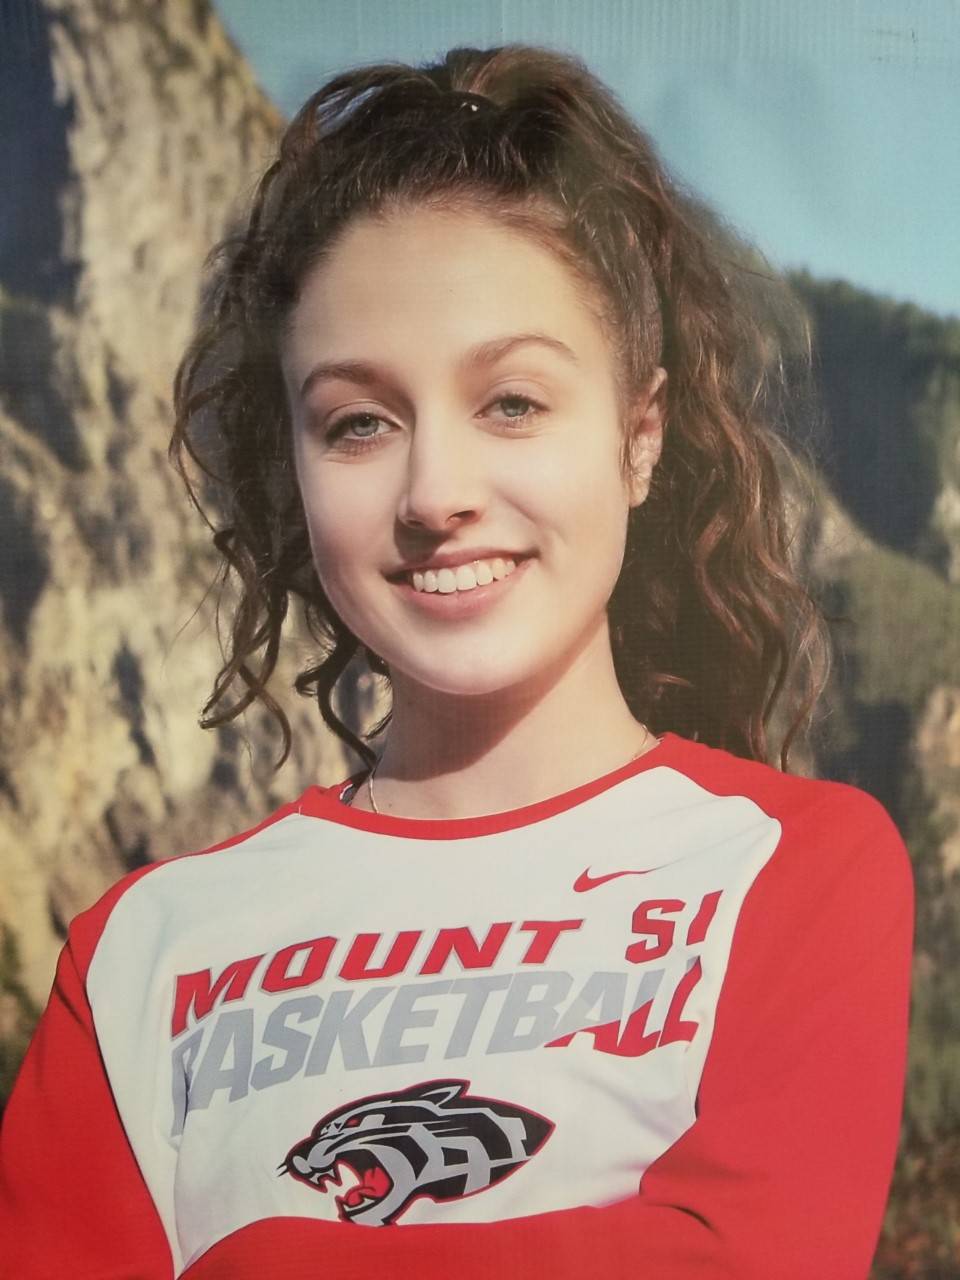 Mount Si High 2019 graduate Savanna Samuelson will play basketball at Pacific University in Forest Grove, Oregon this season. Photo courtesy of Robert Wachtendonk